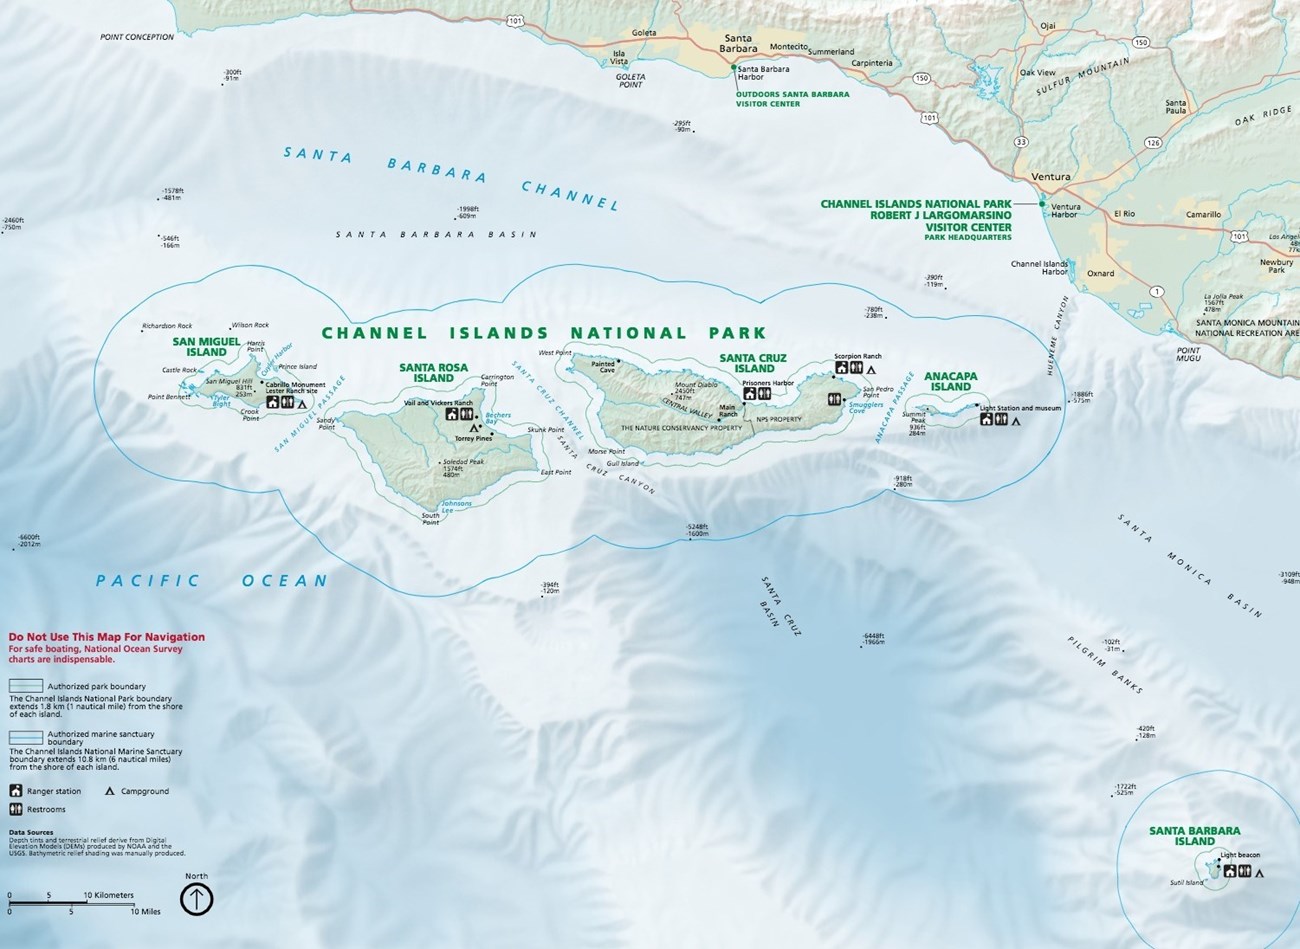 map showing islands in the pacific ocean off the coast of california